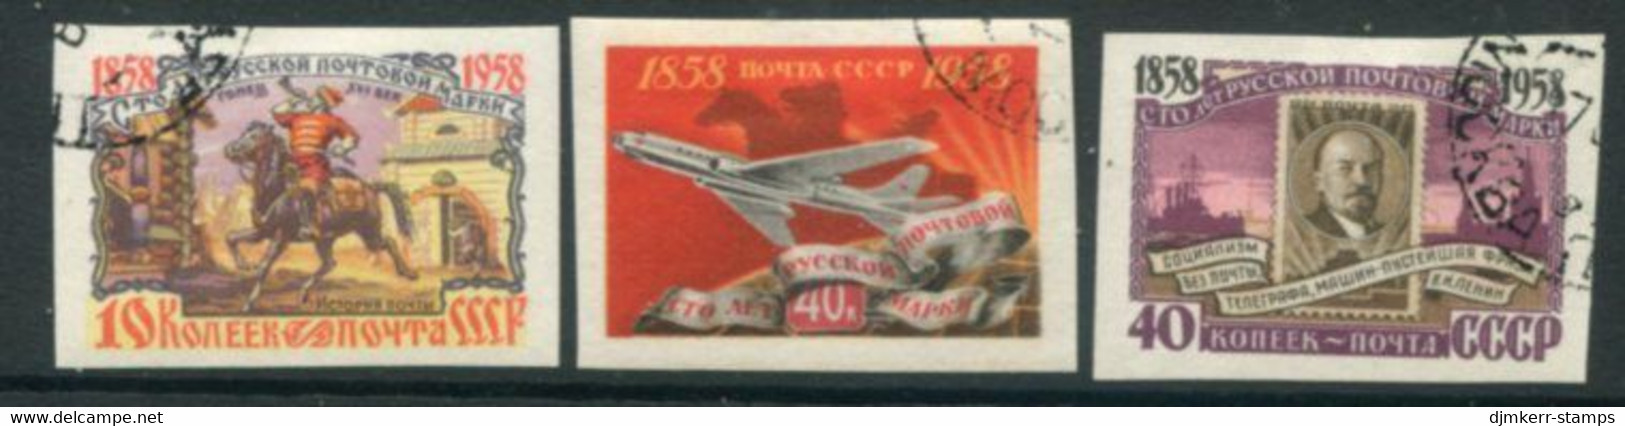 SOVIET UNION 1958 Russian Stamp Centenary Imperforate Used.  Michel 2114, 2118-19 B - Used Stamps